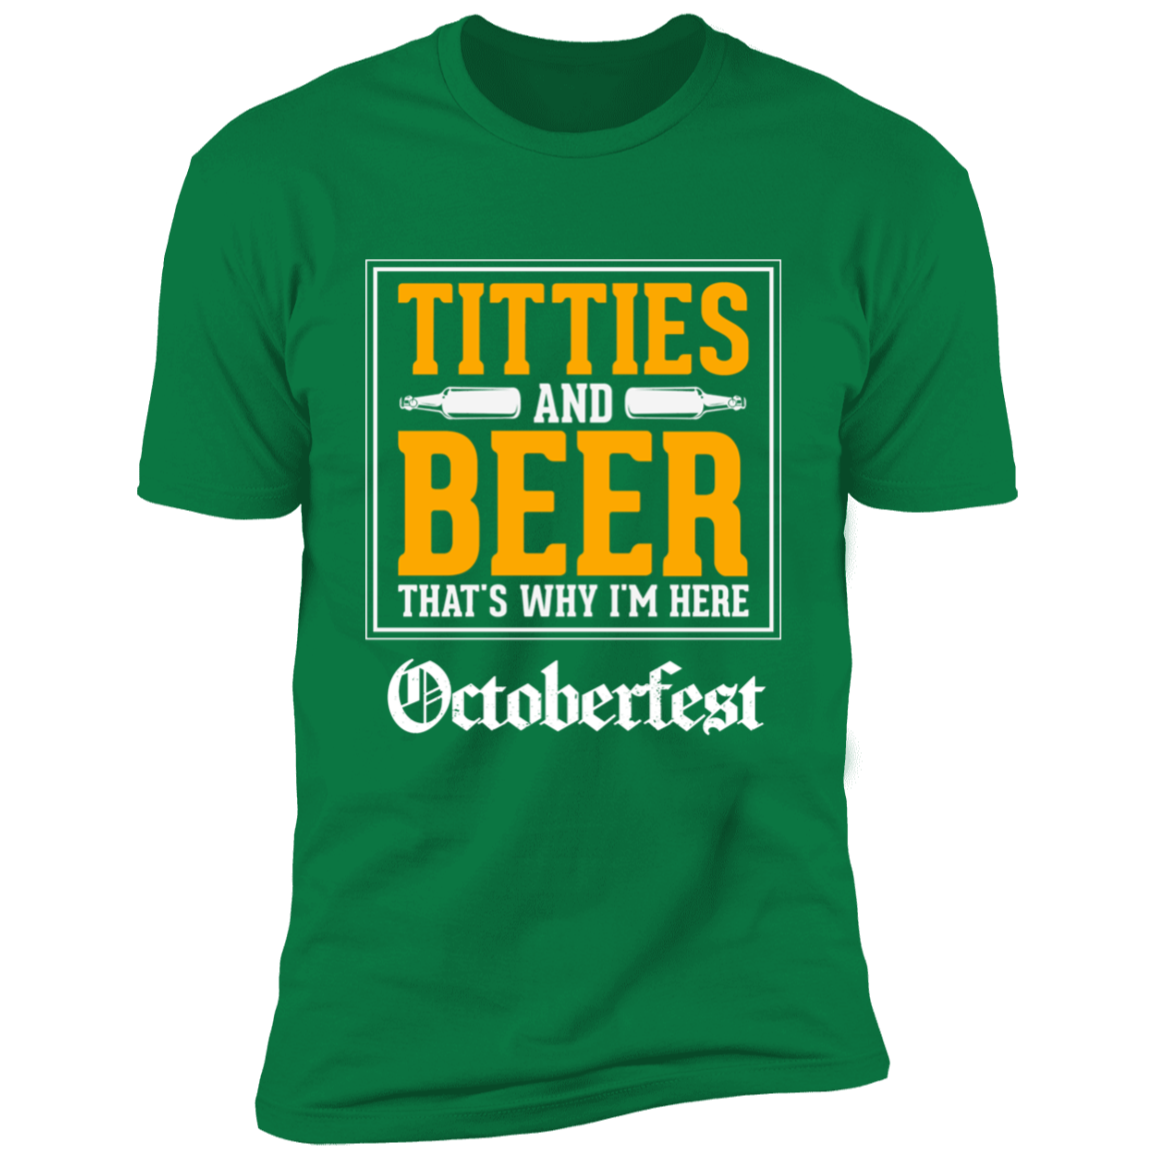 TITTIES AND BEER THAT'S WHY I'M HERE PREMIUM T-SHIRT